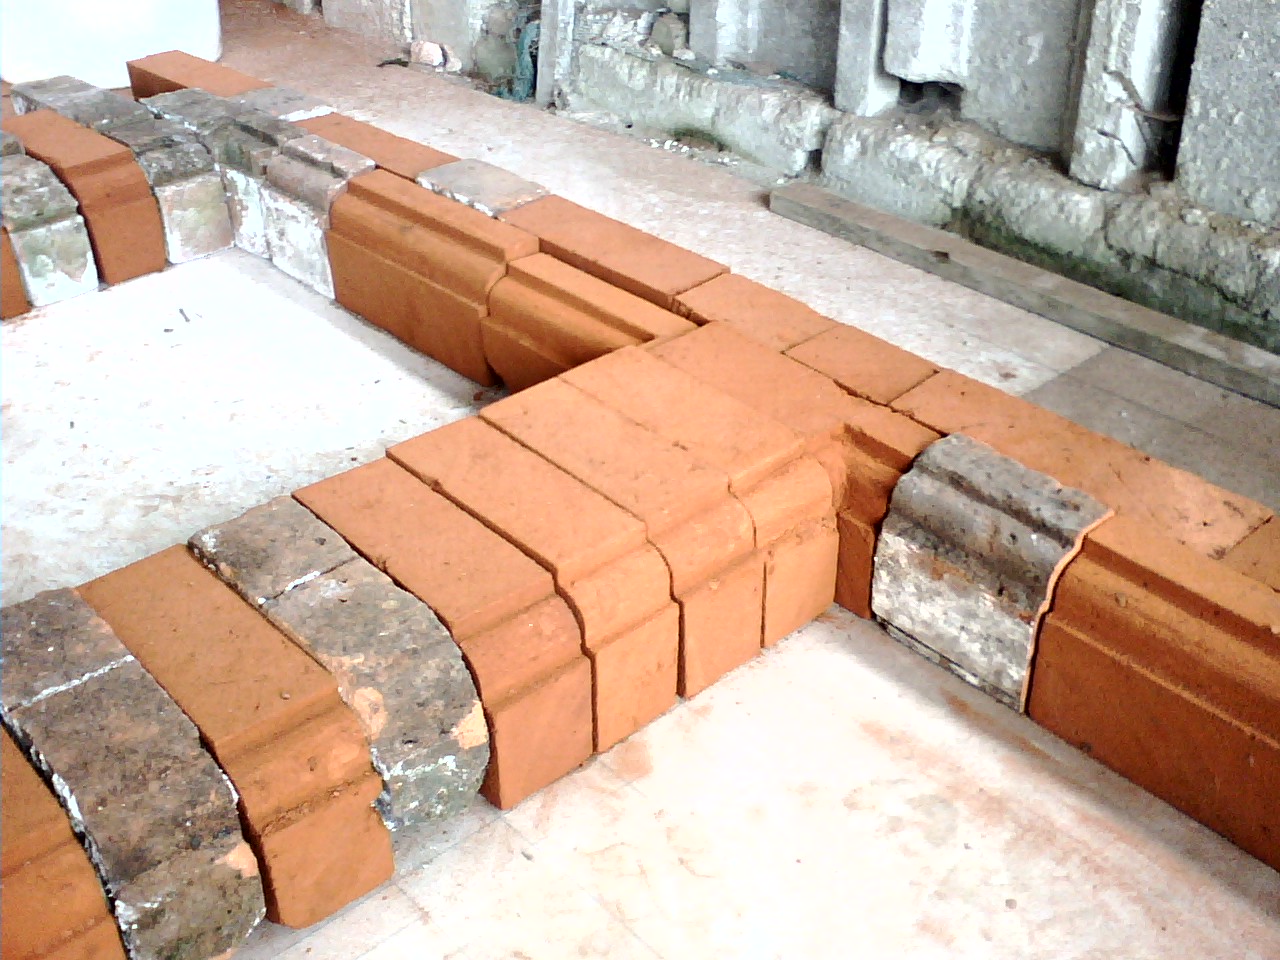 Dry reconstruction of brickwork before site